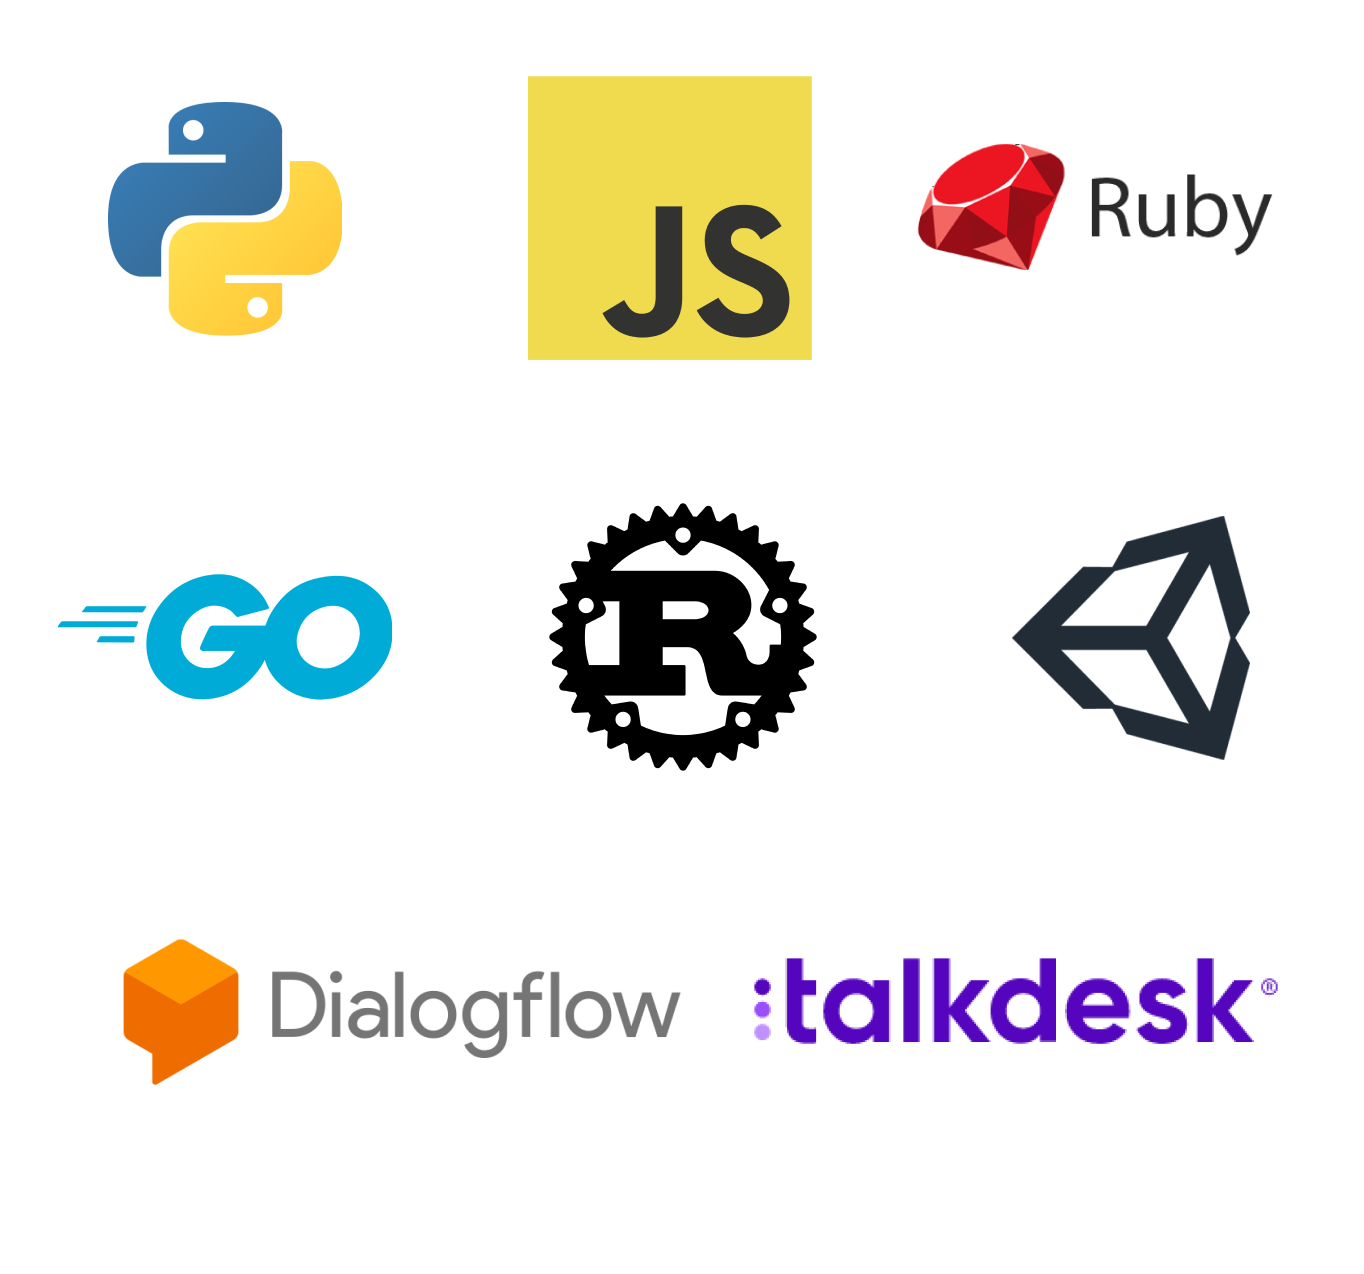 Integrations with Resemble AI featuring Python, Ruby, Javascript, Unity, Talkdesk, and Dialogflow